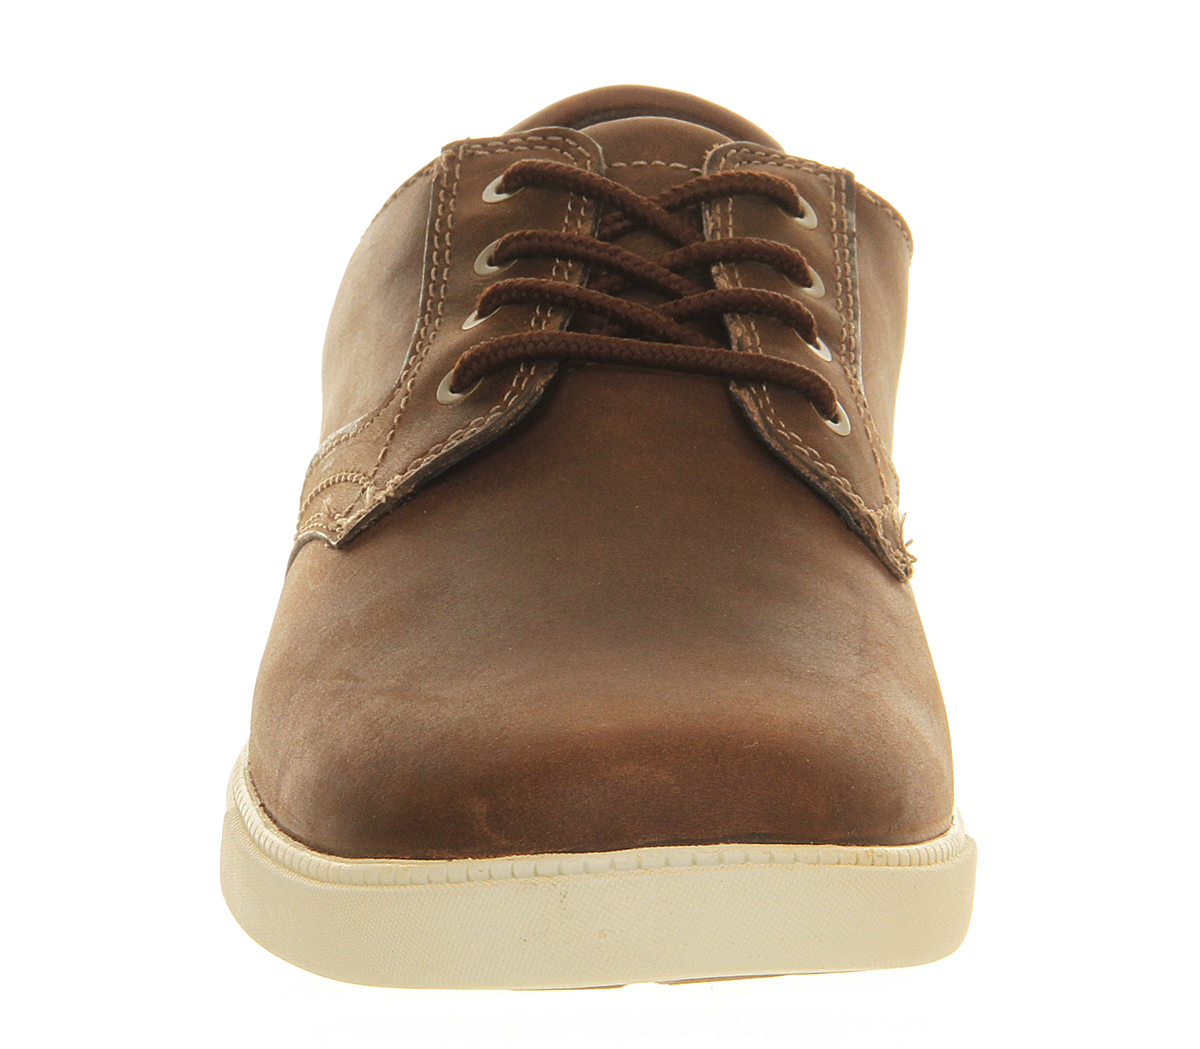 Timberland Fulk Oxford Shoes in Brown for Men - Lyst